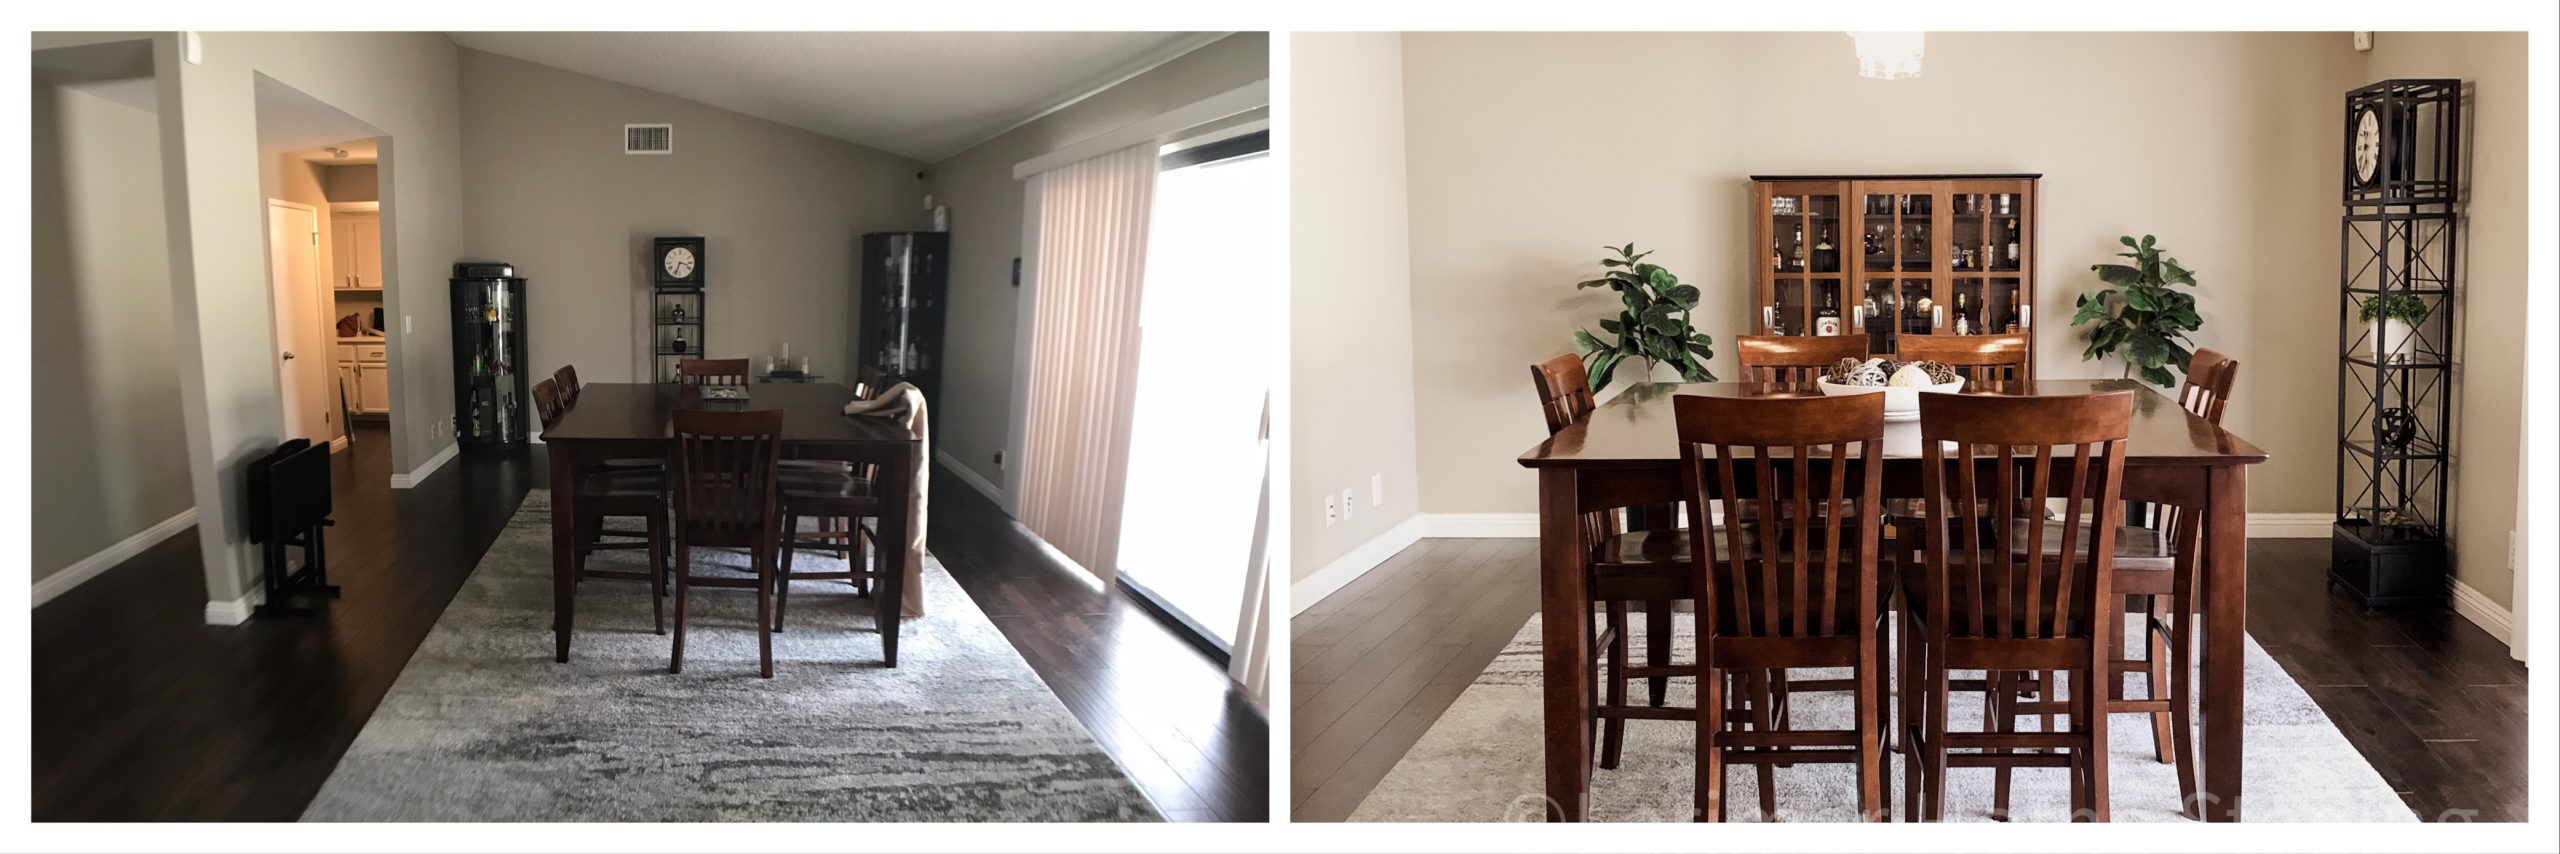 Occupied Home Staging Before and After